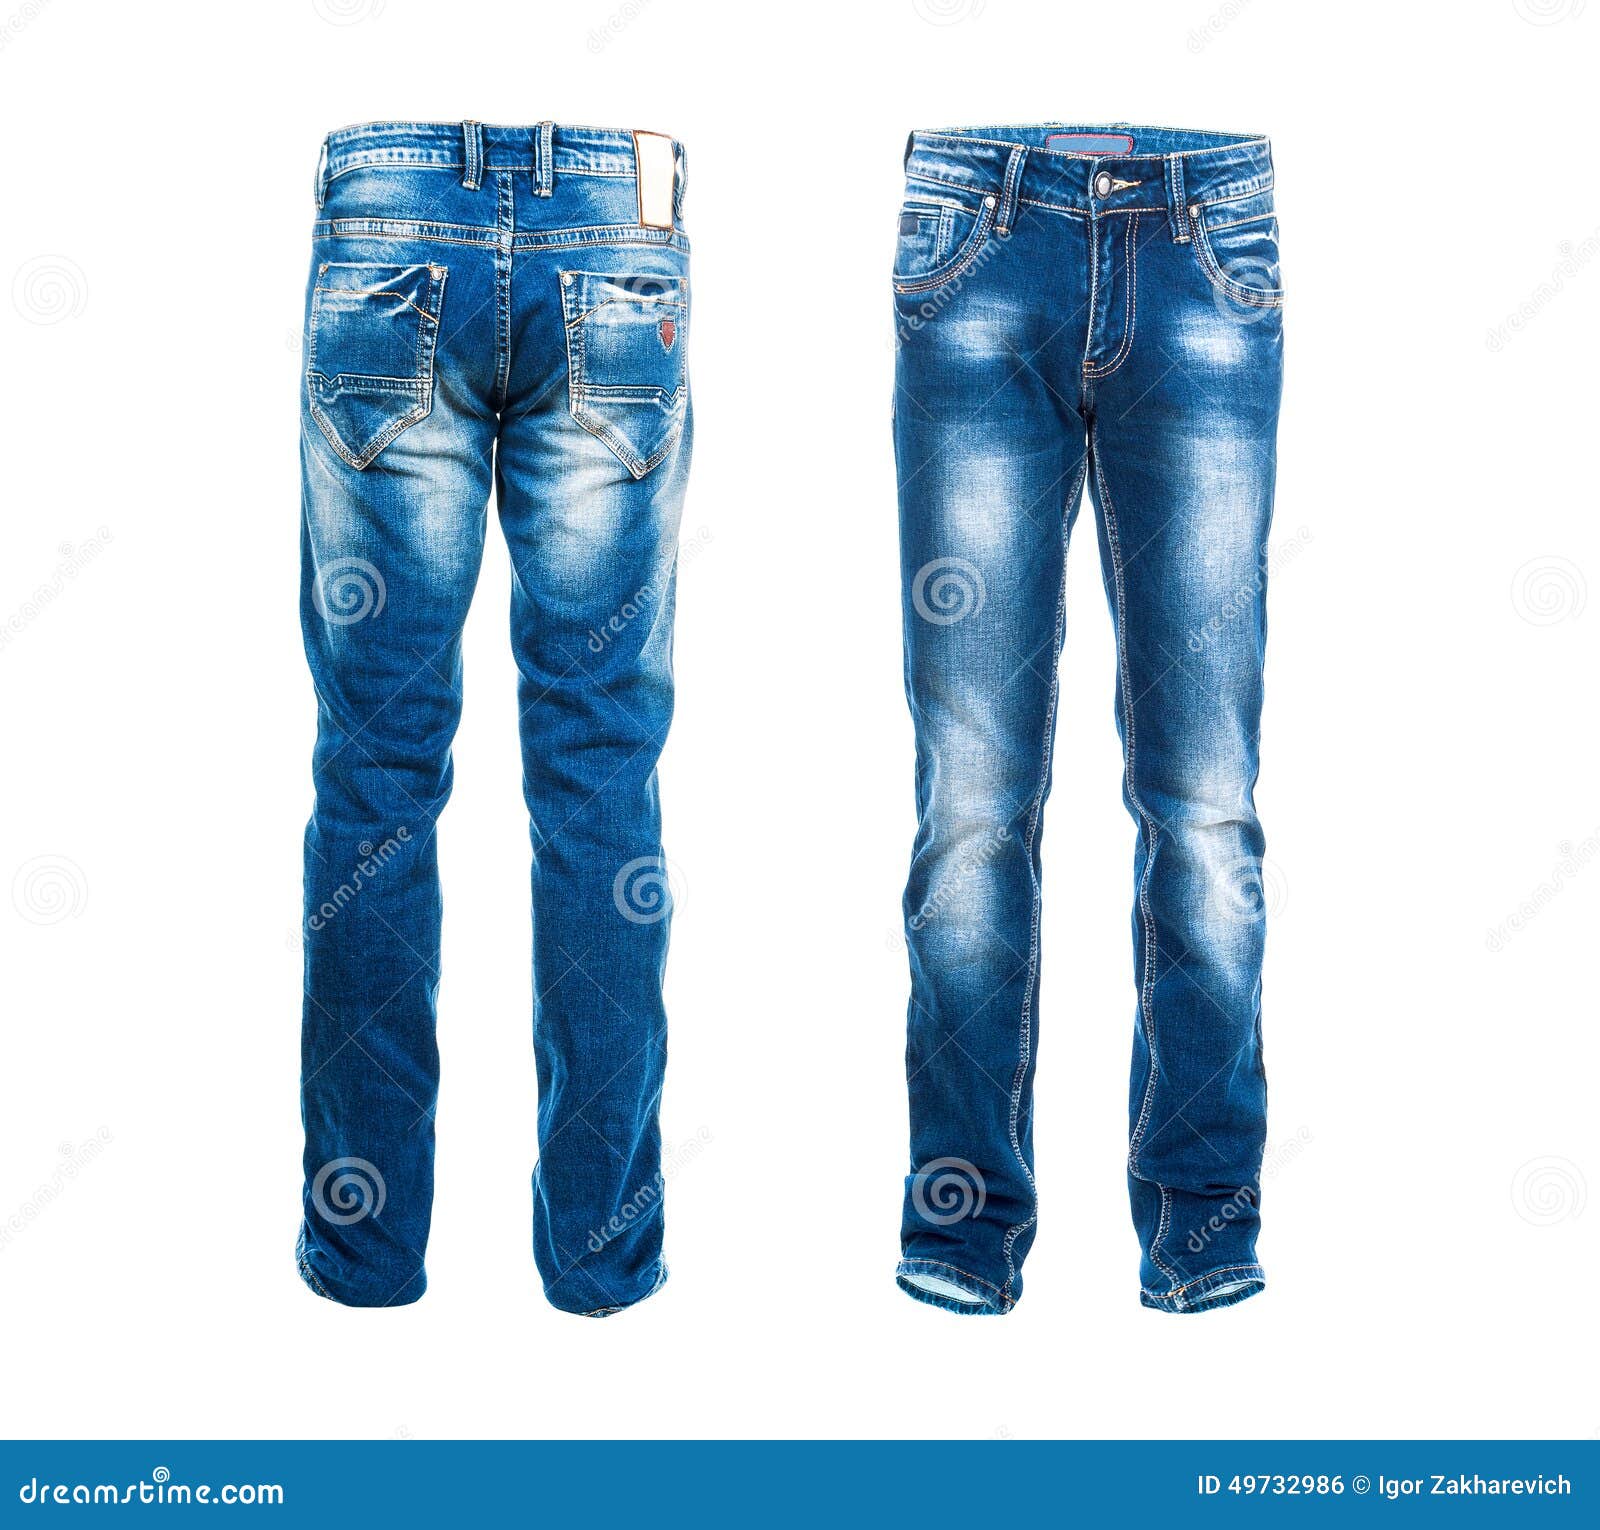 Blue jeans isolated stock photo. Image of female, simple - 49732986